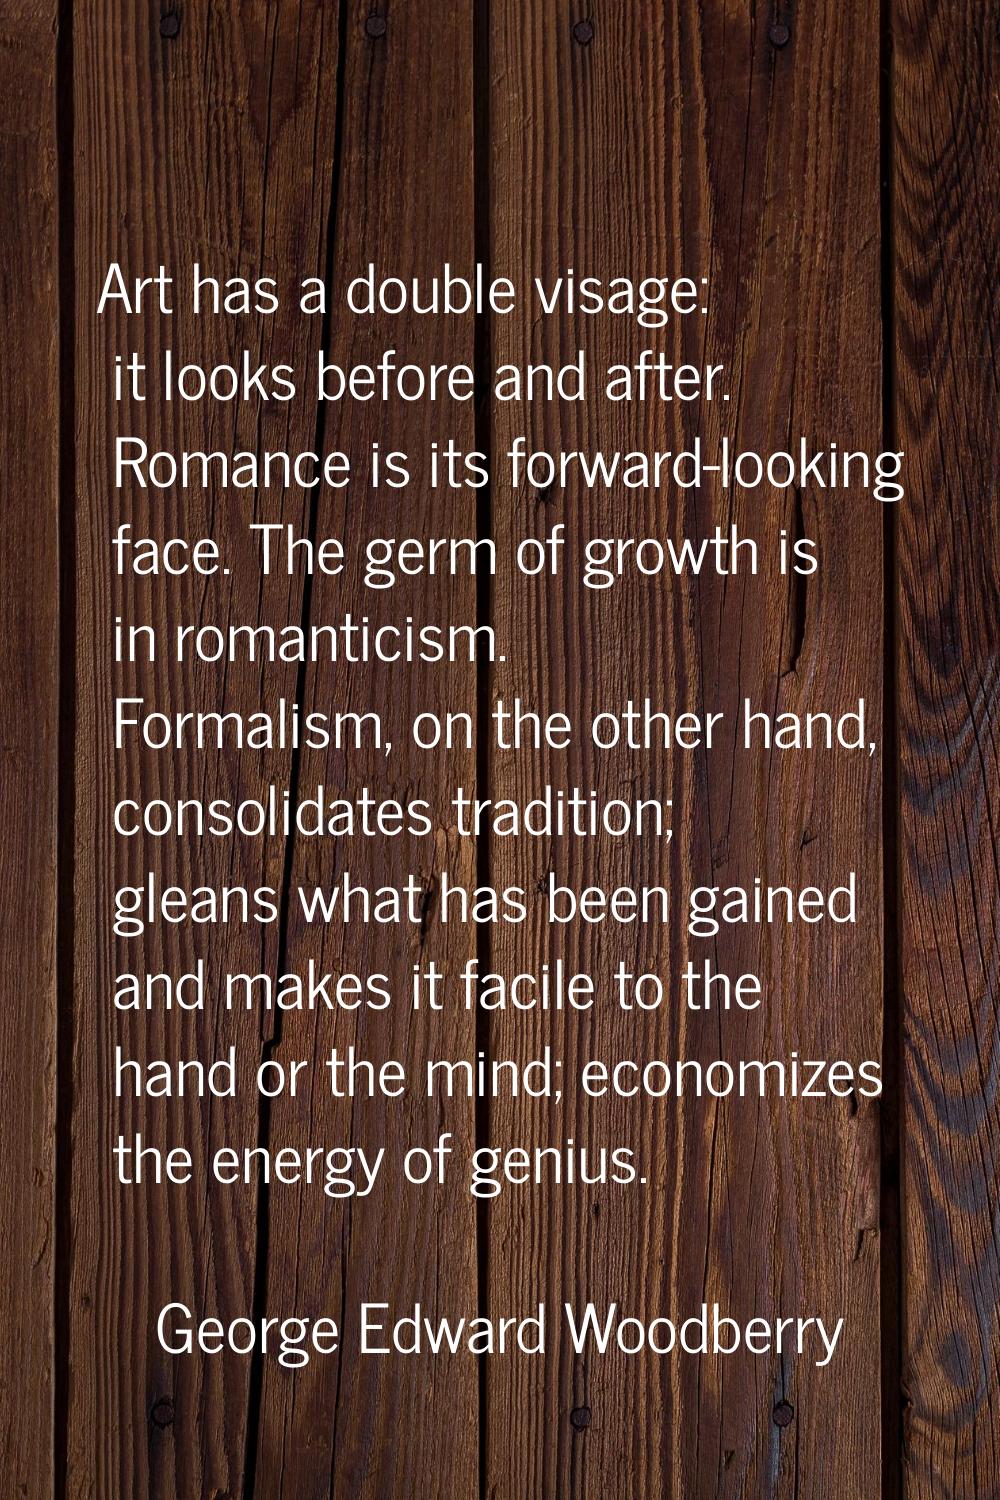 Art has a double visage: it looks before and after. Romance is its forward-looking face. The germ o